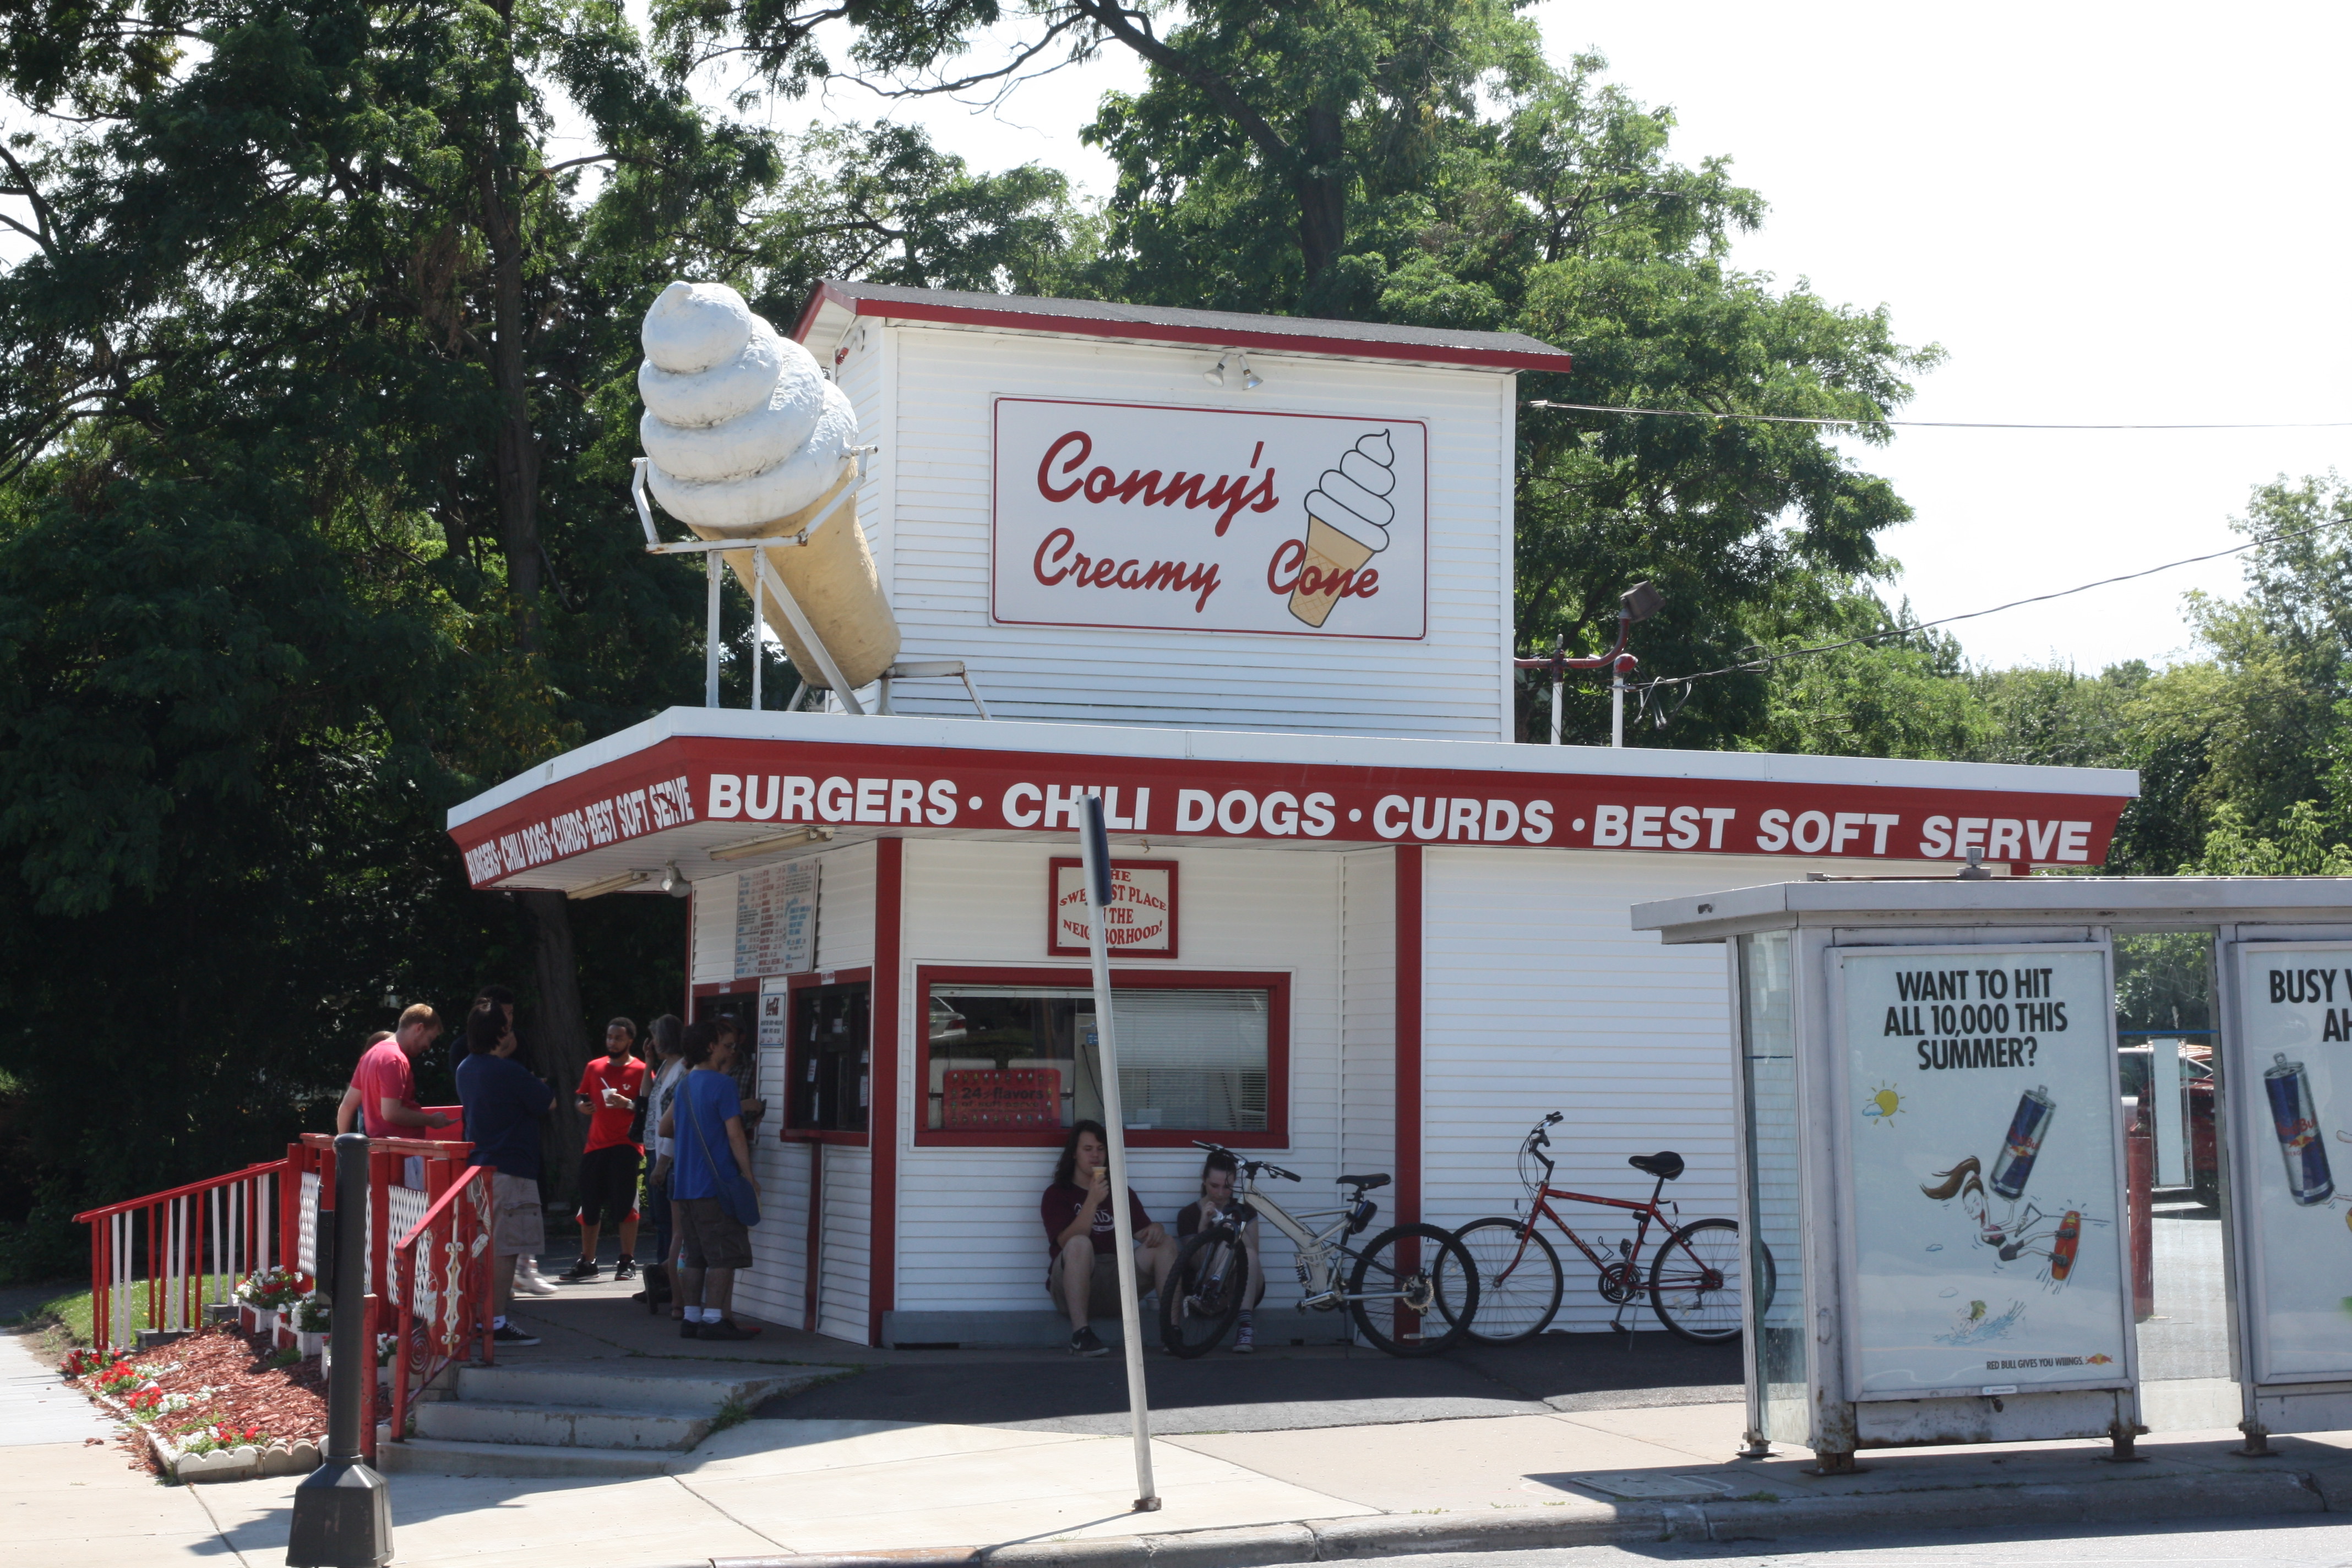 There seems to be a line all summer at Conny’s Creamy Cone.